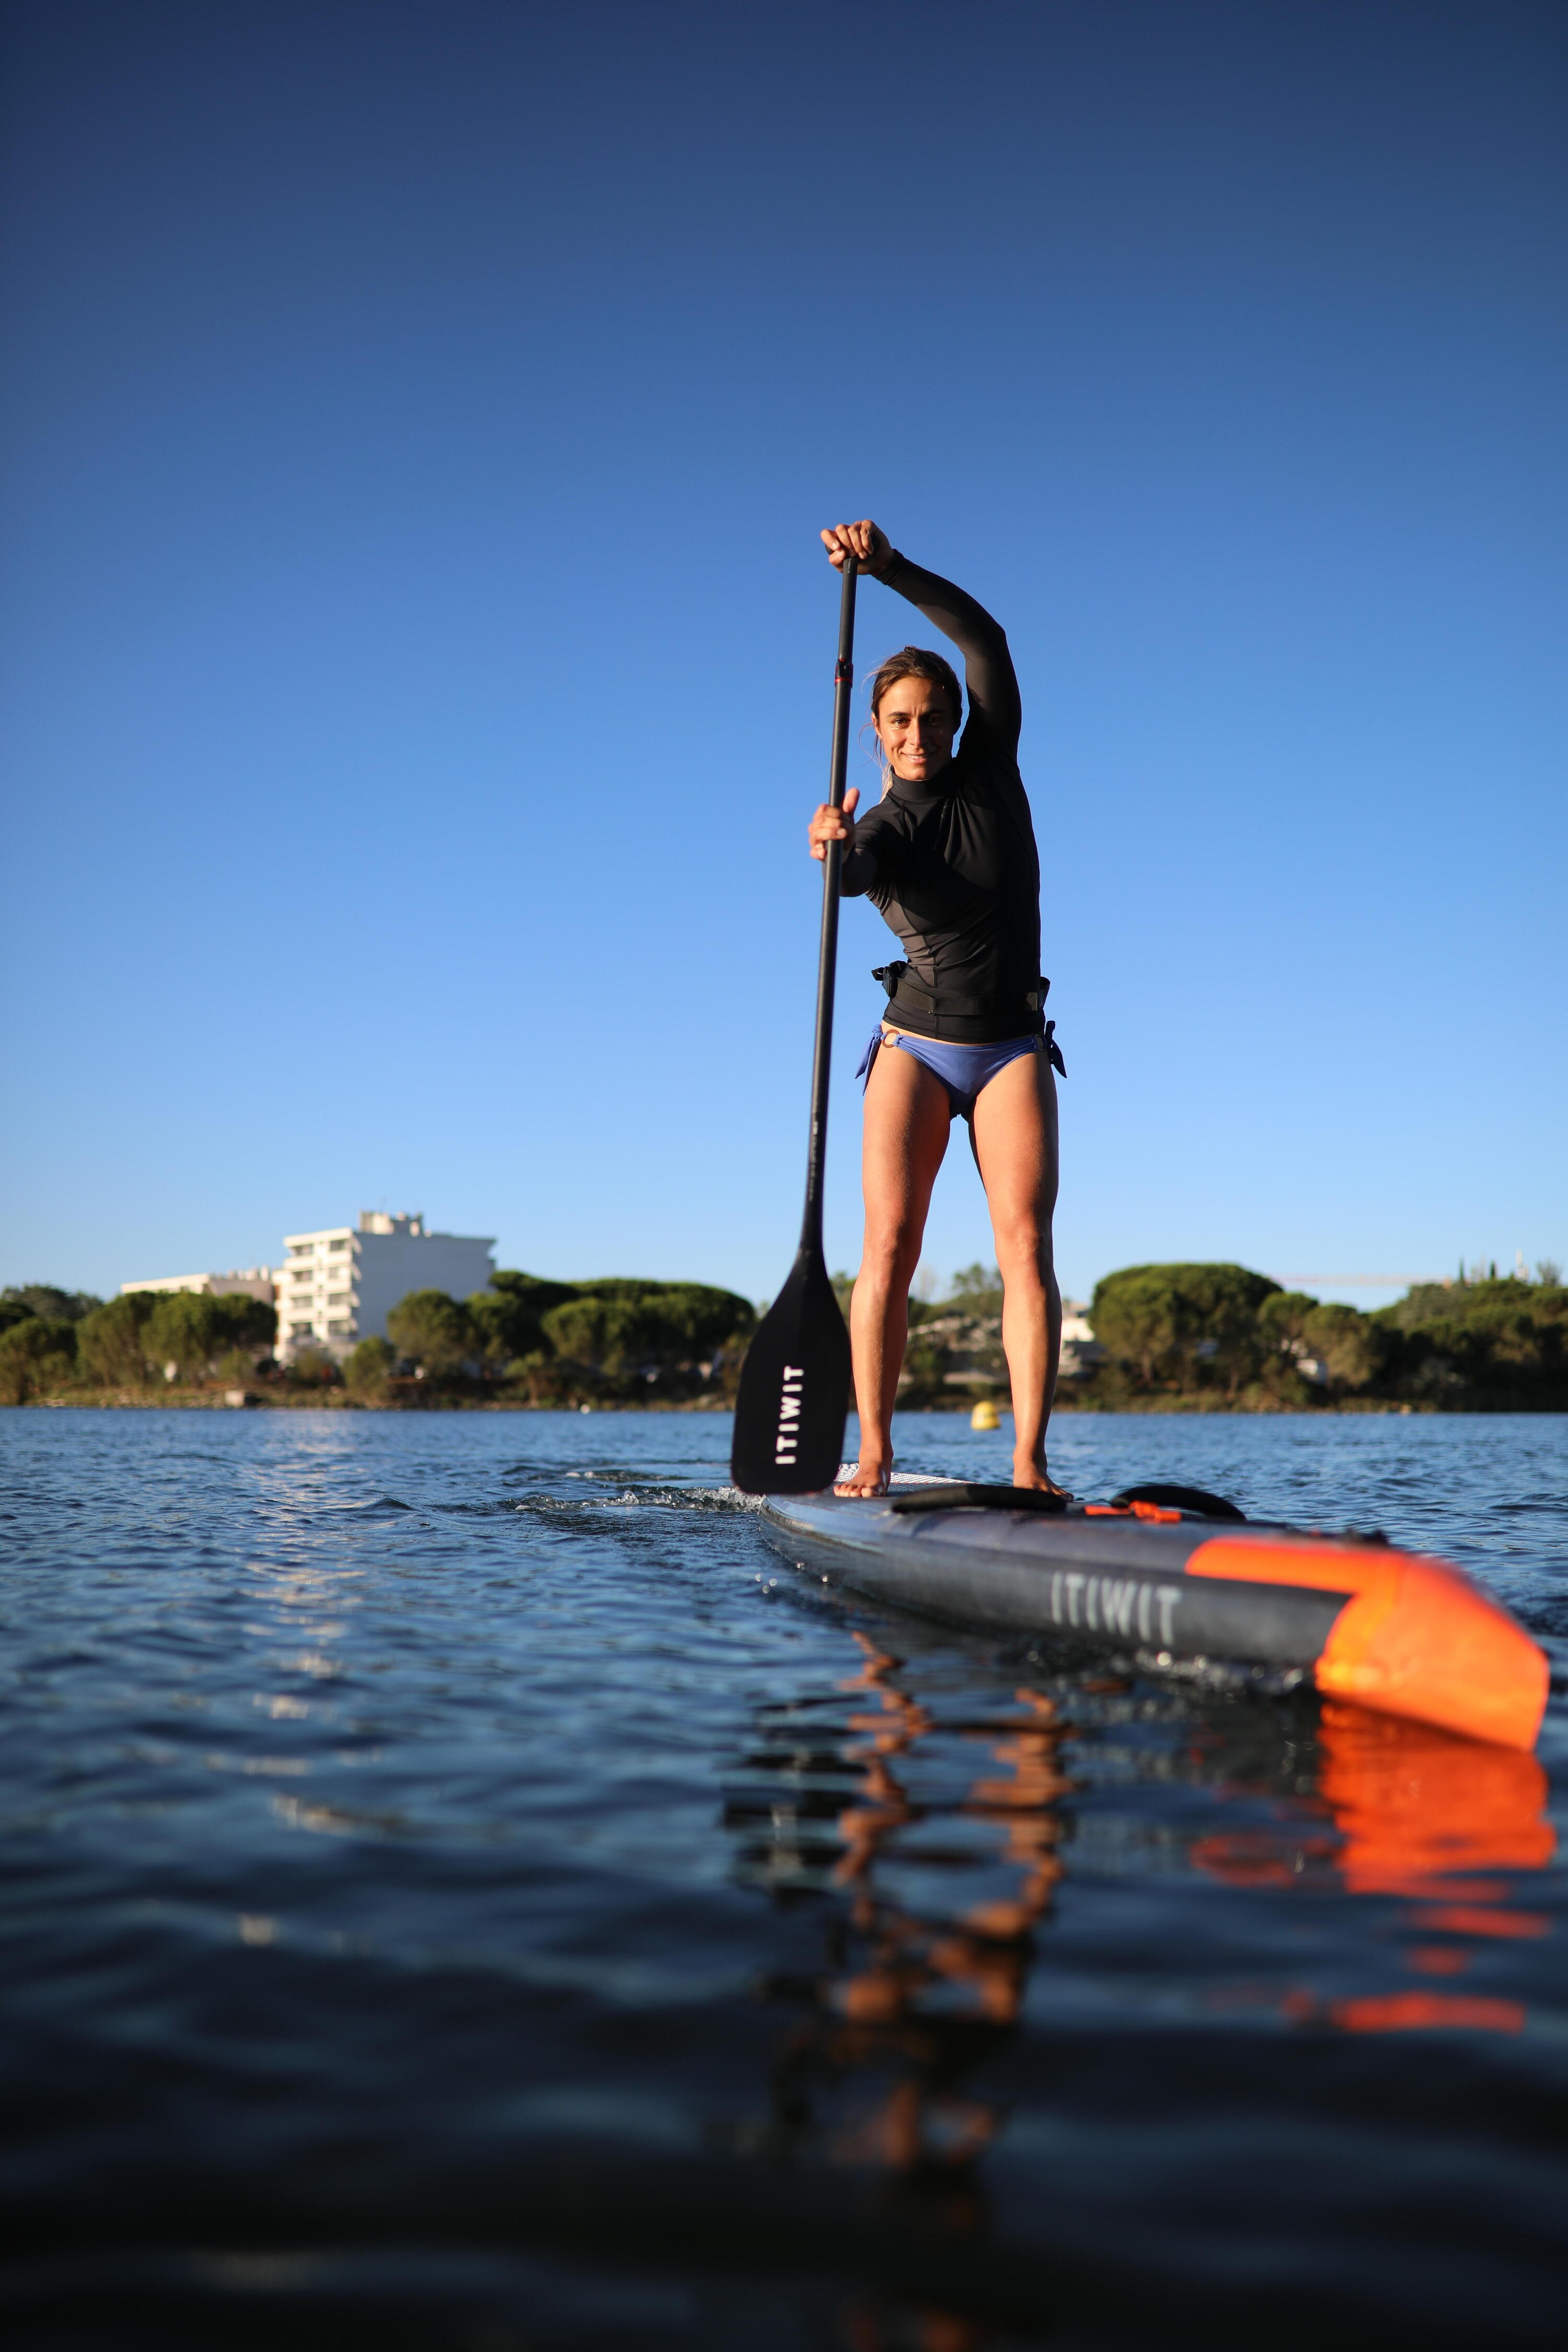 Inflatable stand-up paddle board Race 14'27" - R500 2/16